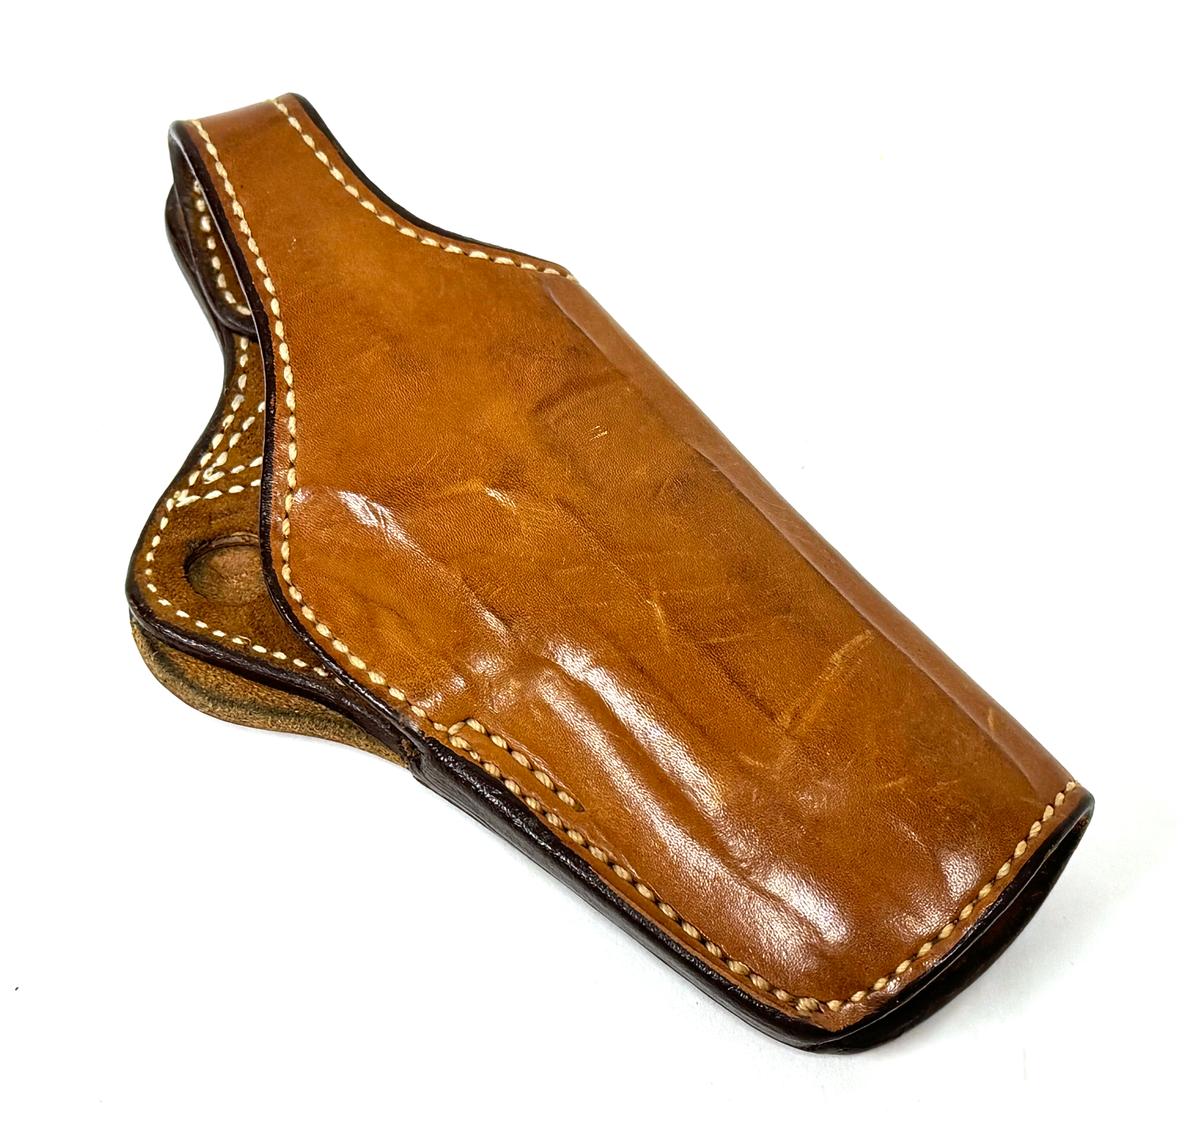 Bianchi #111 “Cyclone” S&W 9MM AUTO Leather Holster